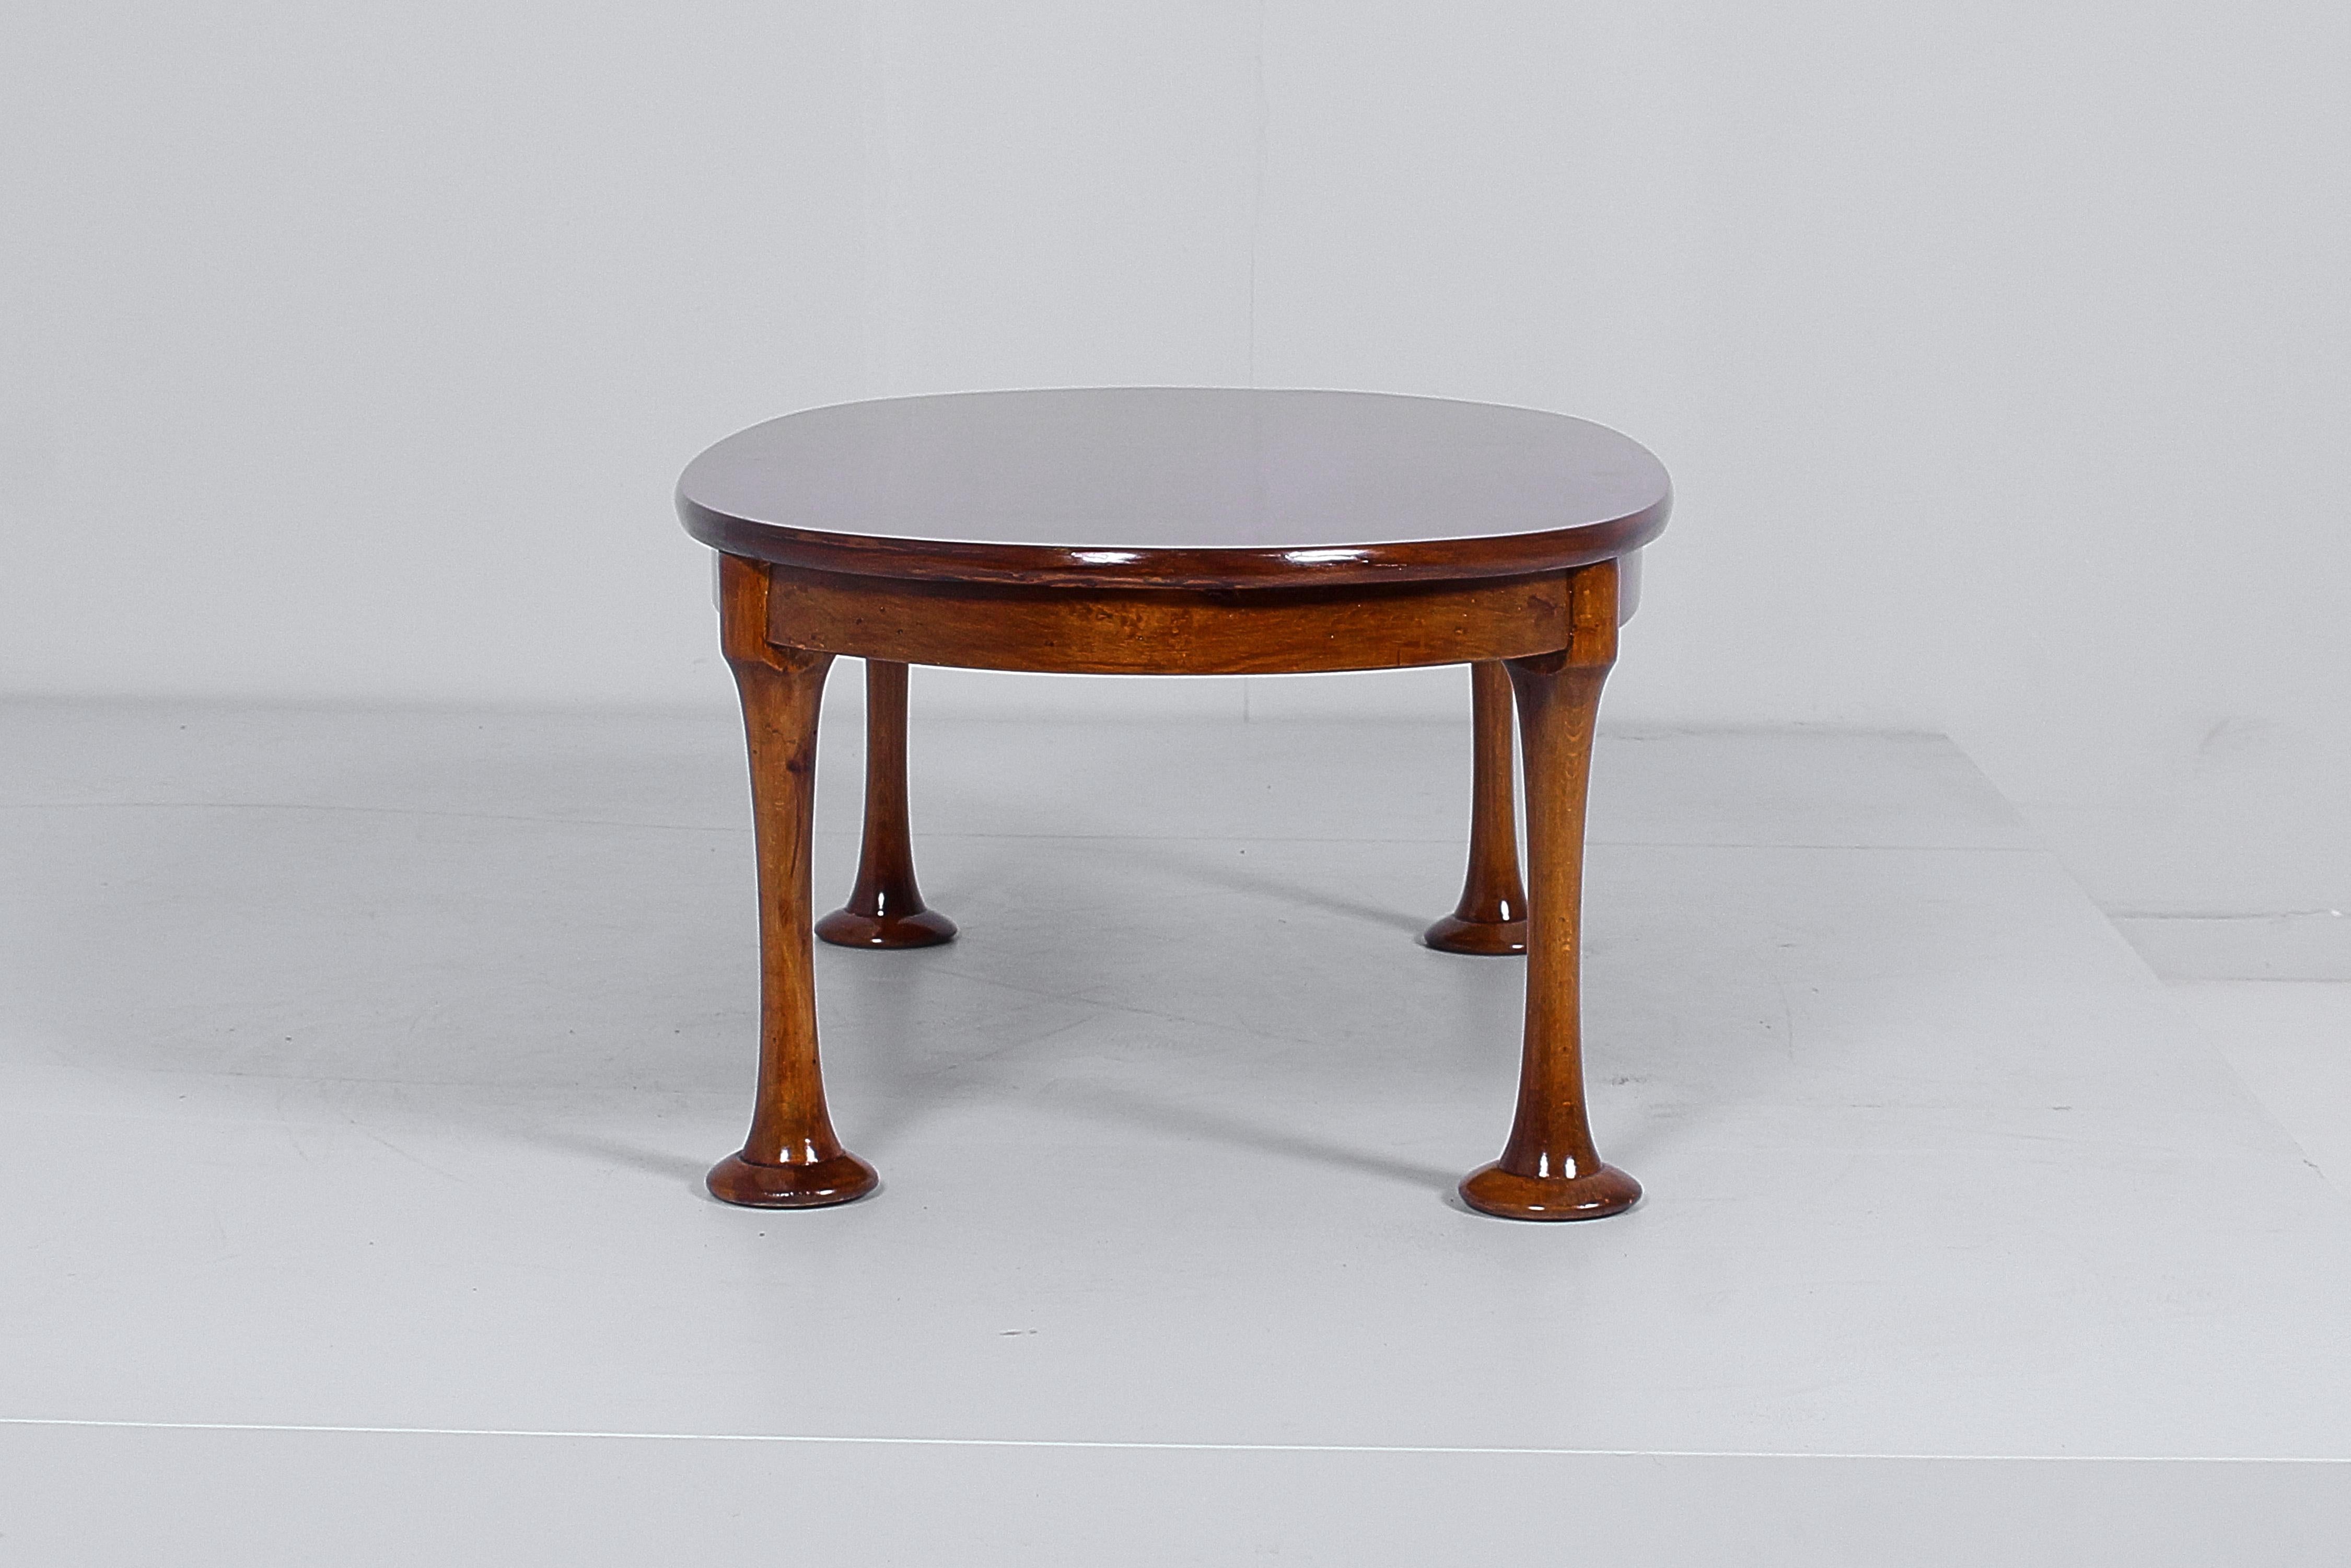 Midcentury A. Mangiarotti Style Wood Coffee Table, 60s, Italy For Sale 2